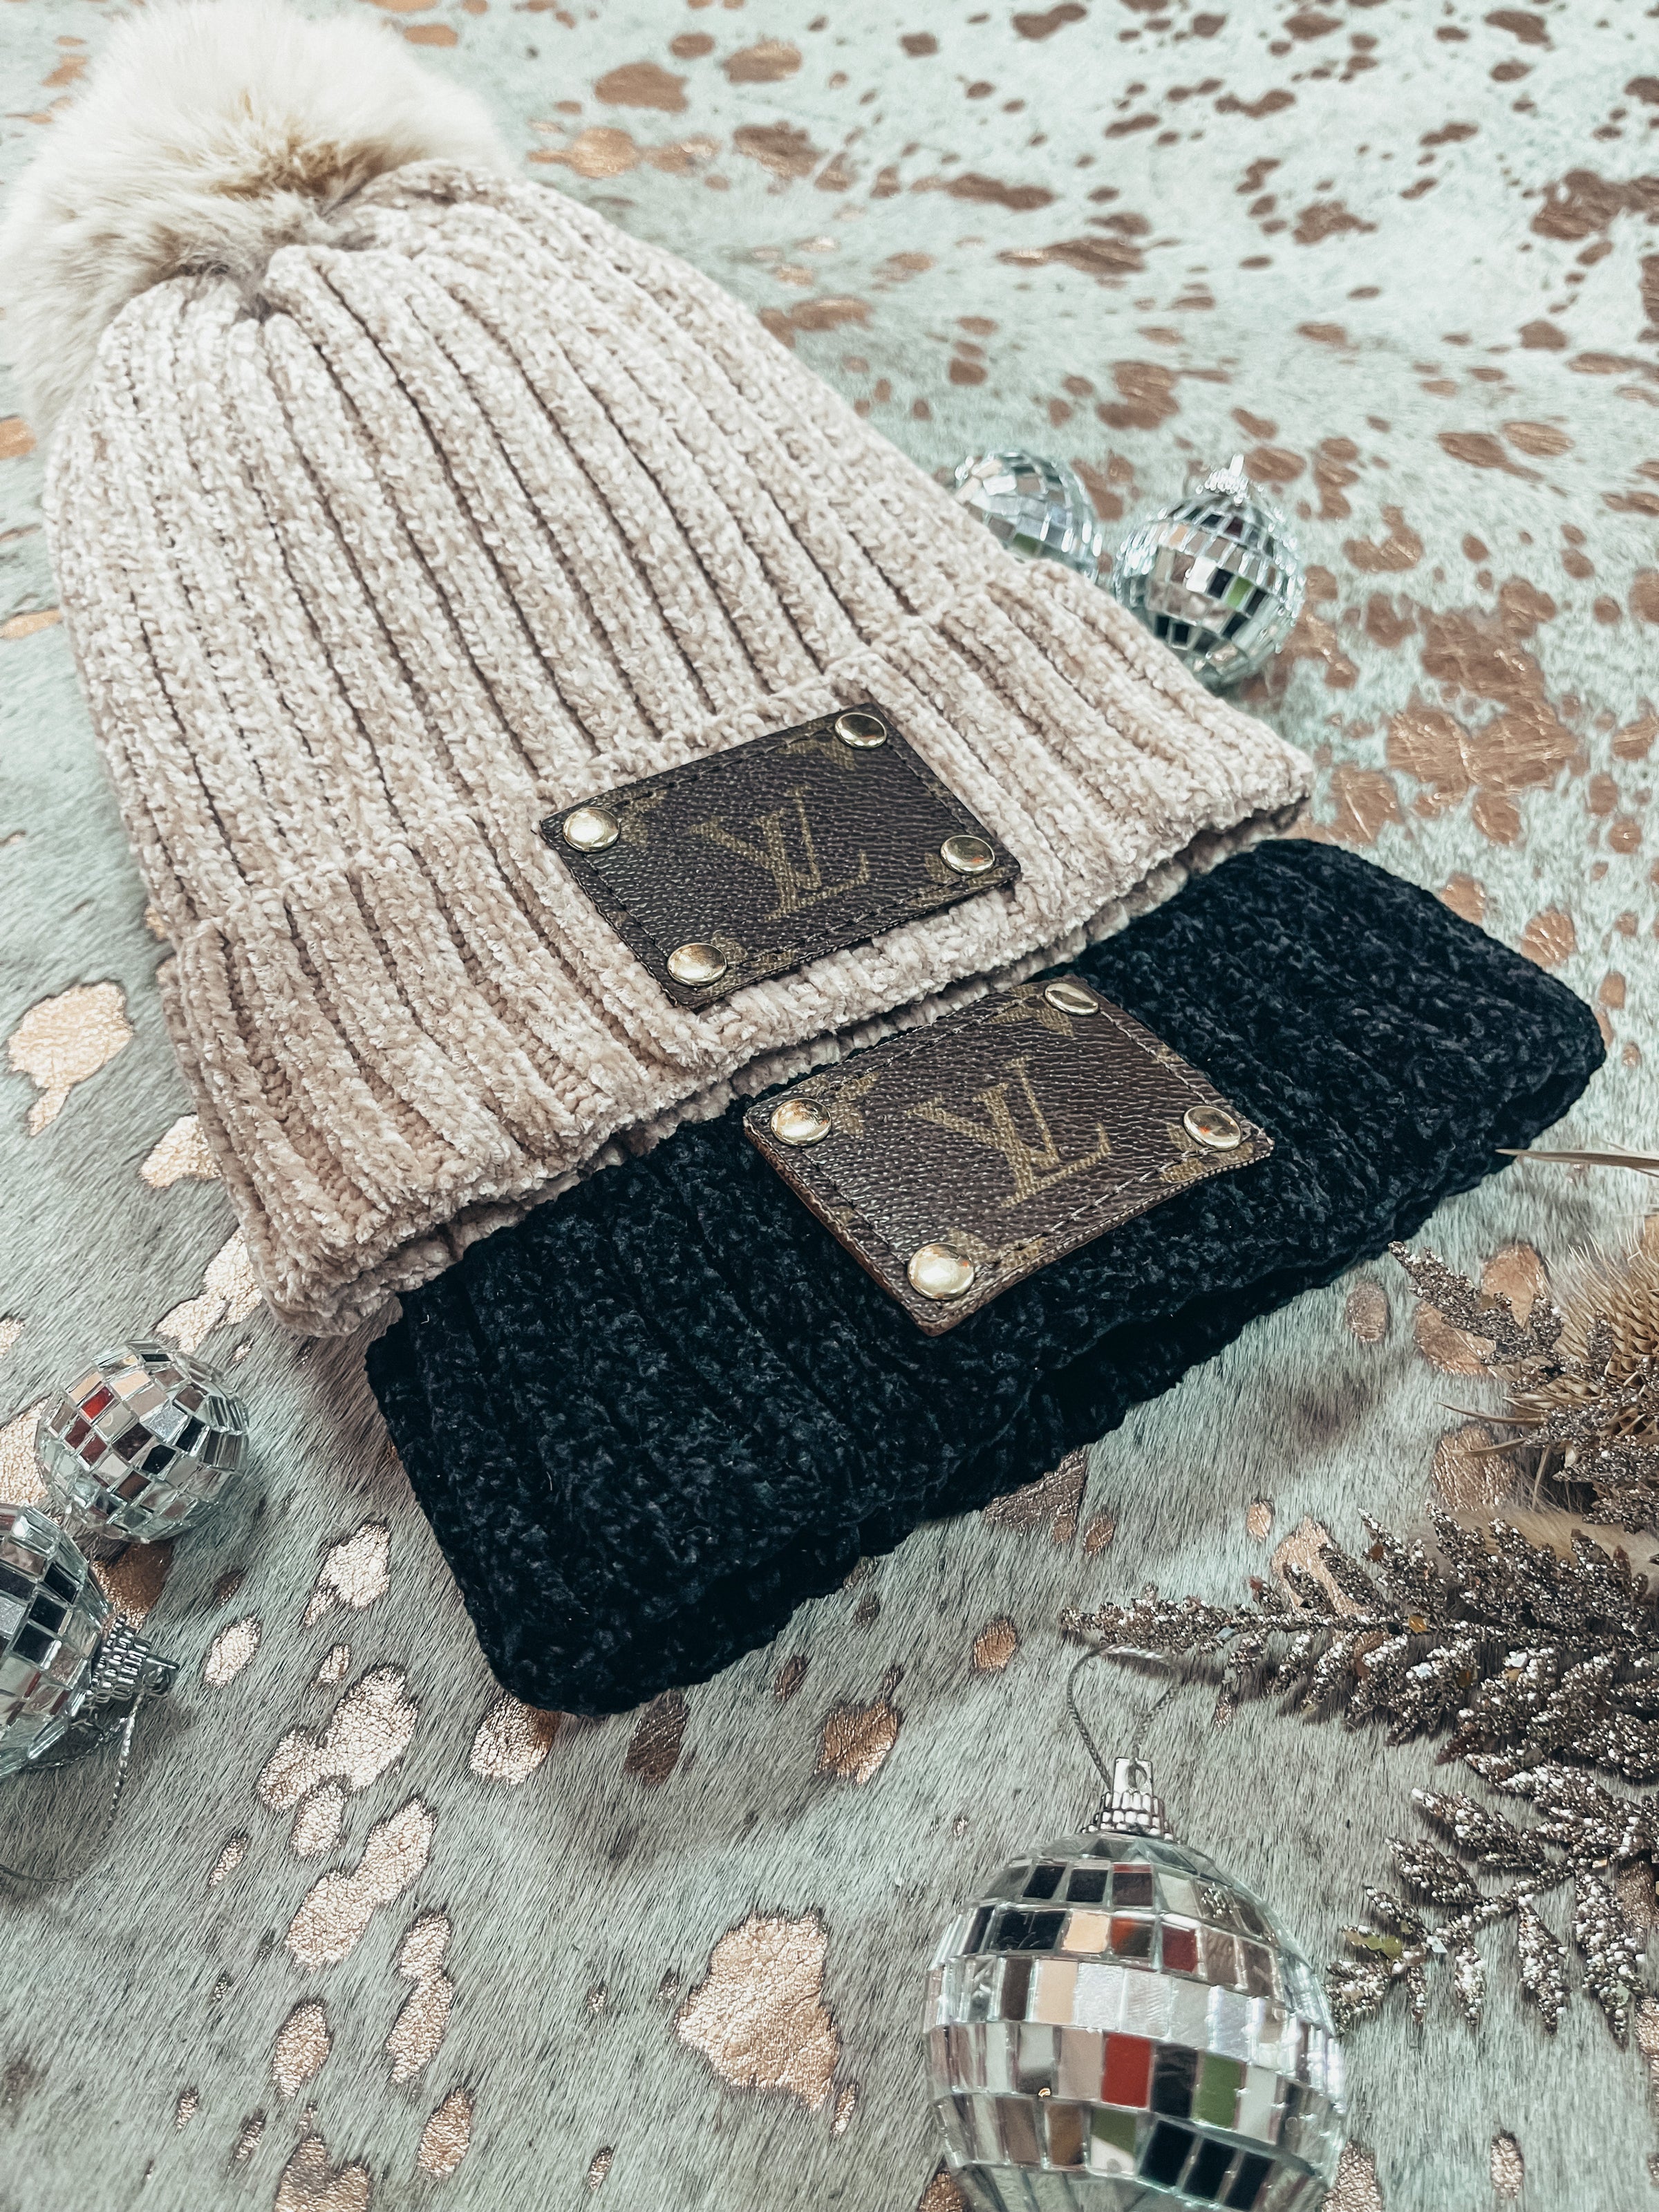 Re-Purposed Lv Patch Beanie – Anagails Wholesale